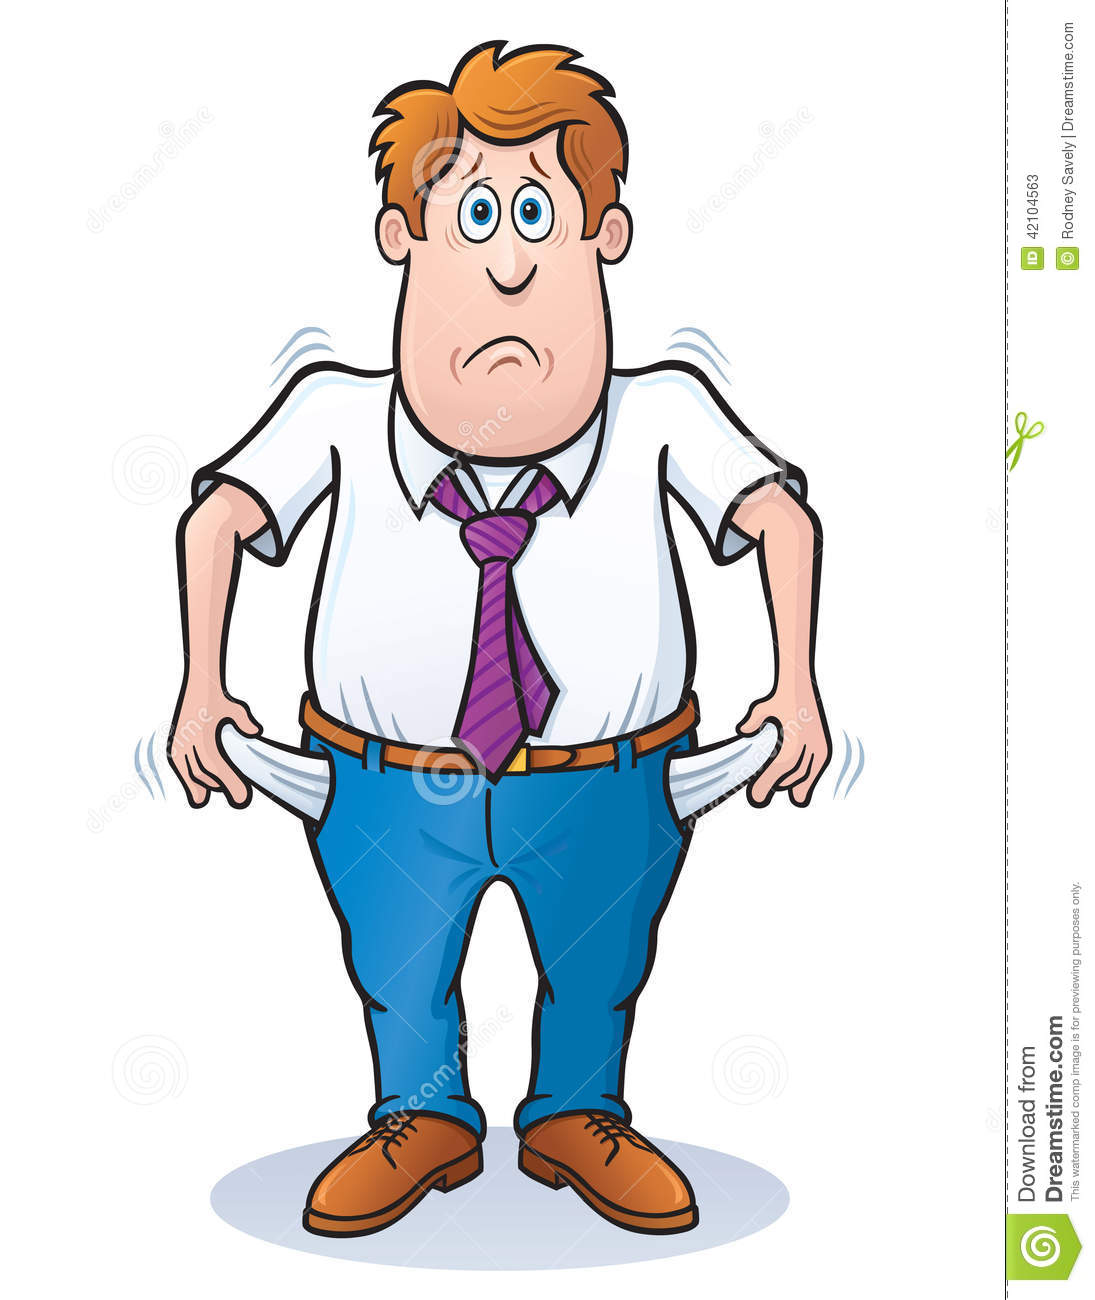 Cartoon Illustration Of Man Pulling The Pockets Of His Pants Open To